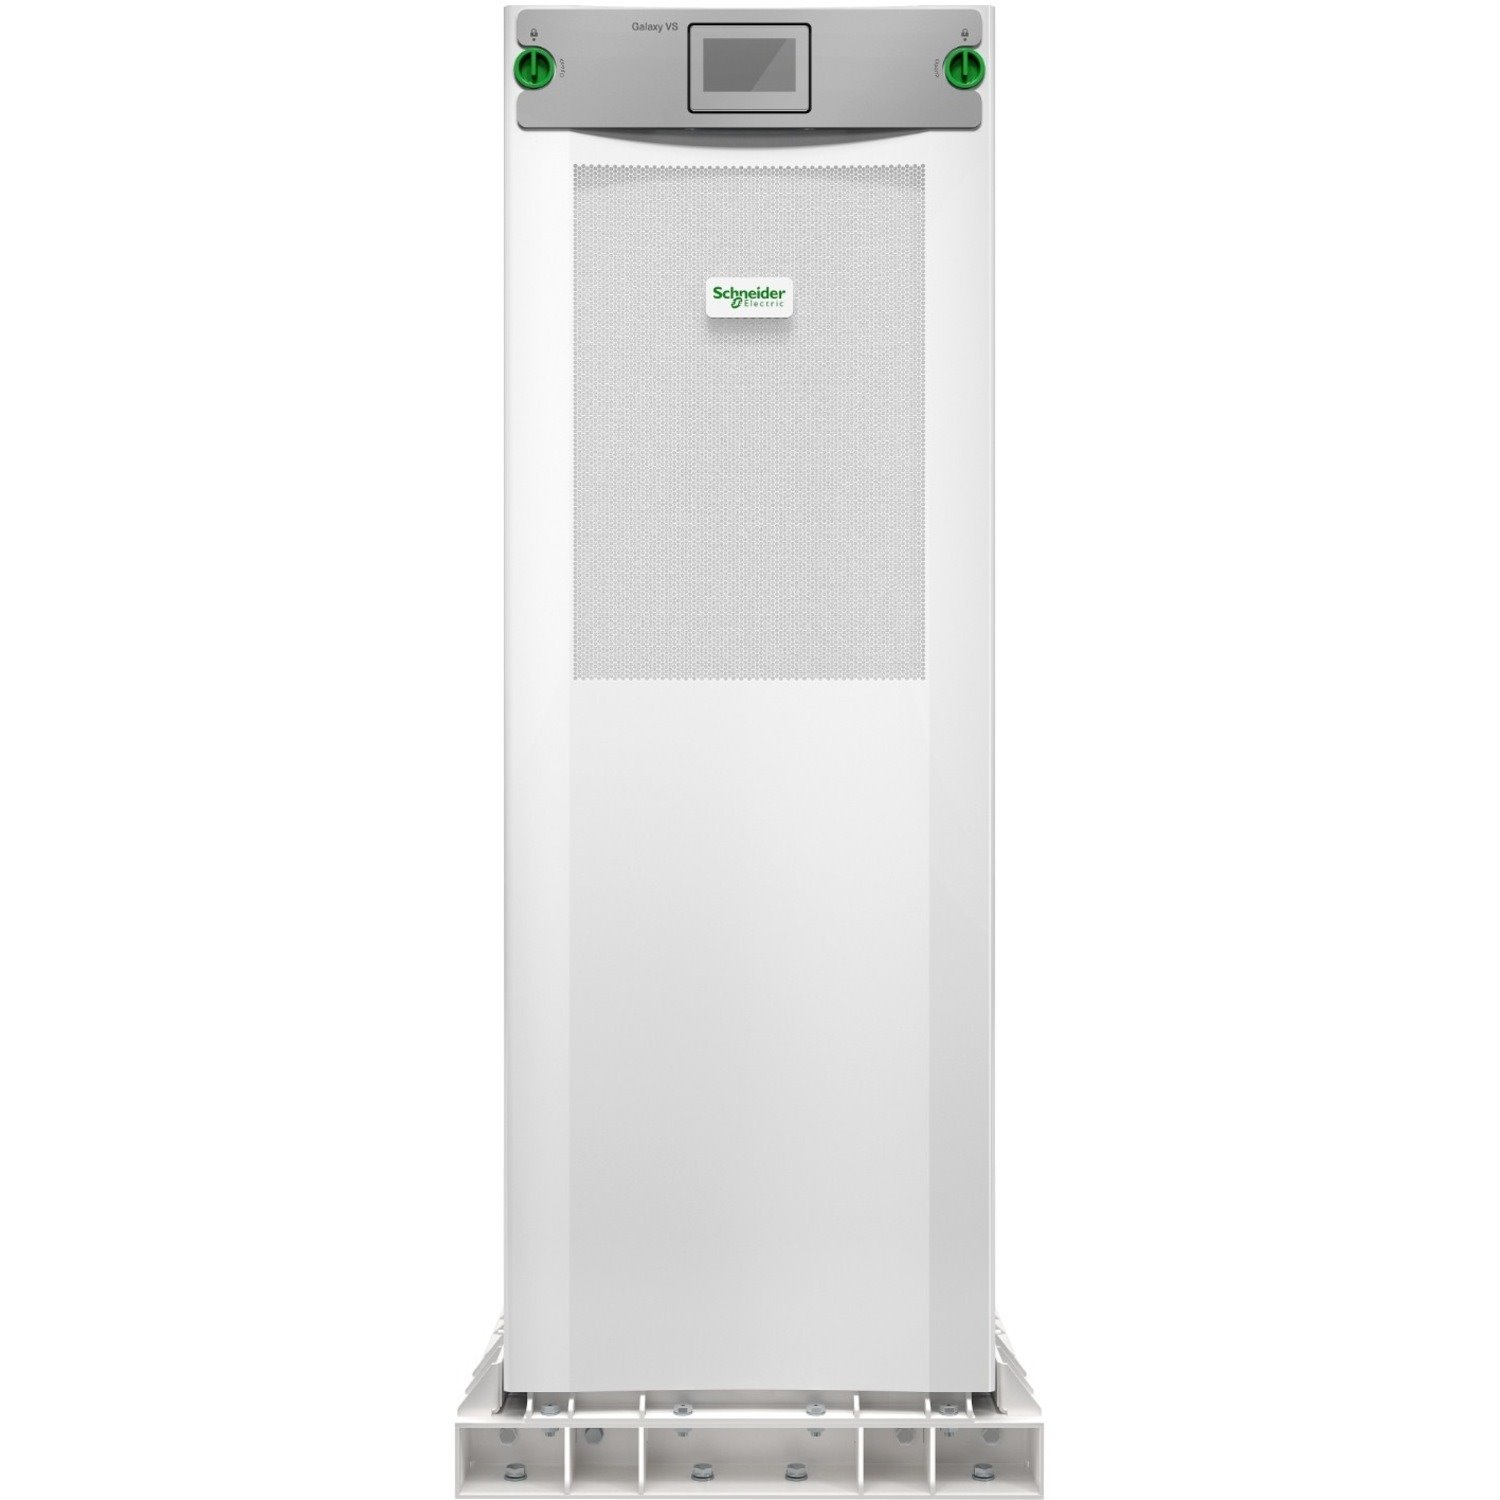 APC by Schneider Electric Galaxy VS Double Conversion Online UPS - 80 kVA/80 kW - Three Phase